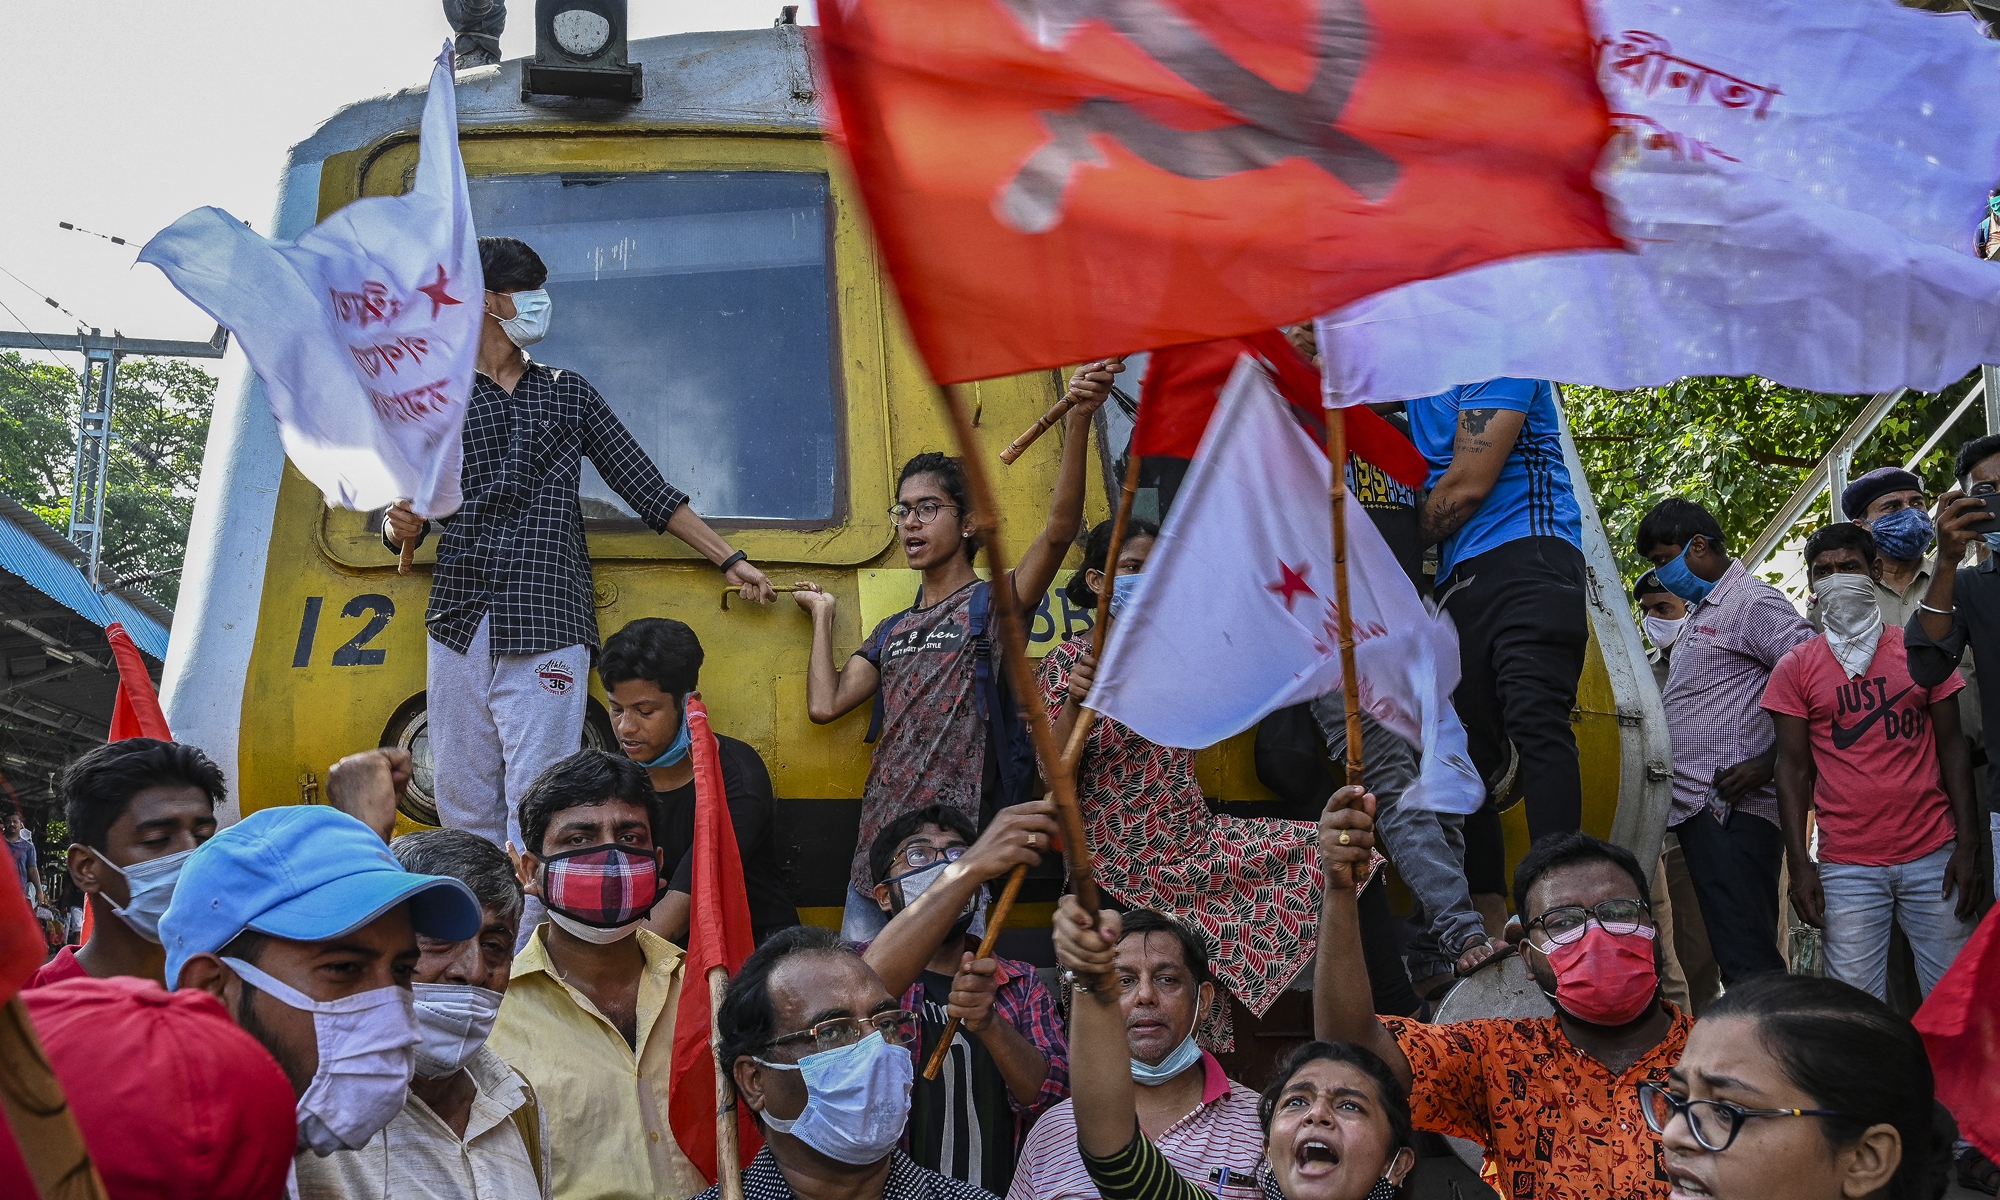 Indian activists and farmers try to stop a train at a railway station in Kolkata to protest against the central government's agricultural reforms on September 27, 2021. Photo: AFP